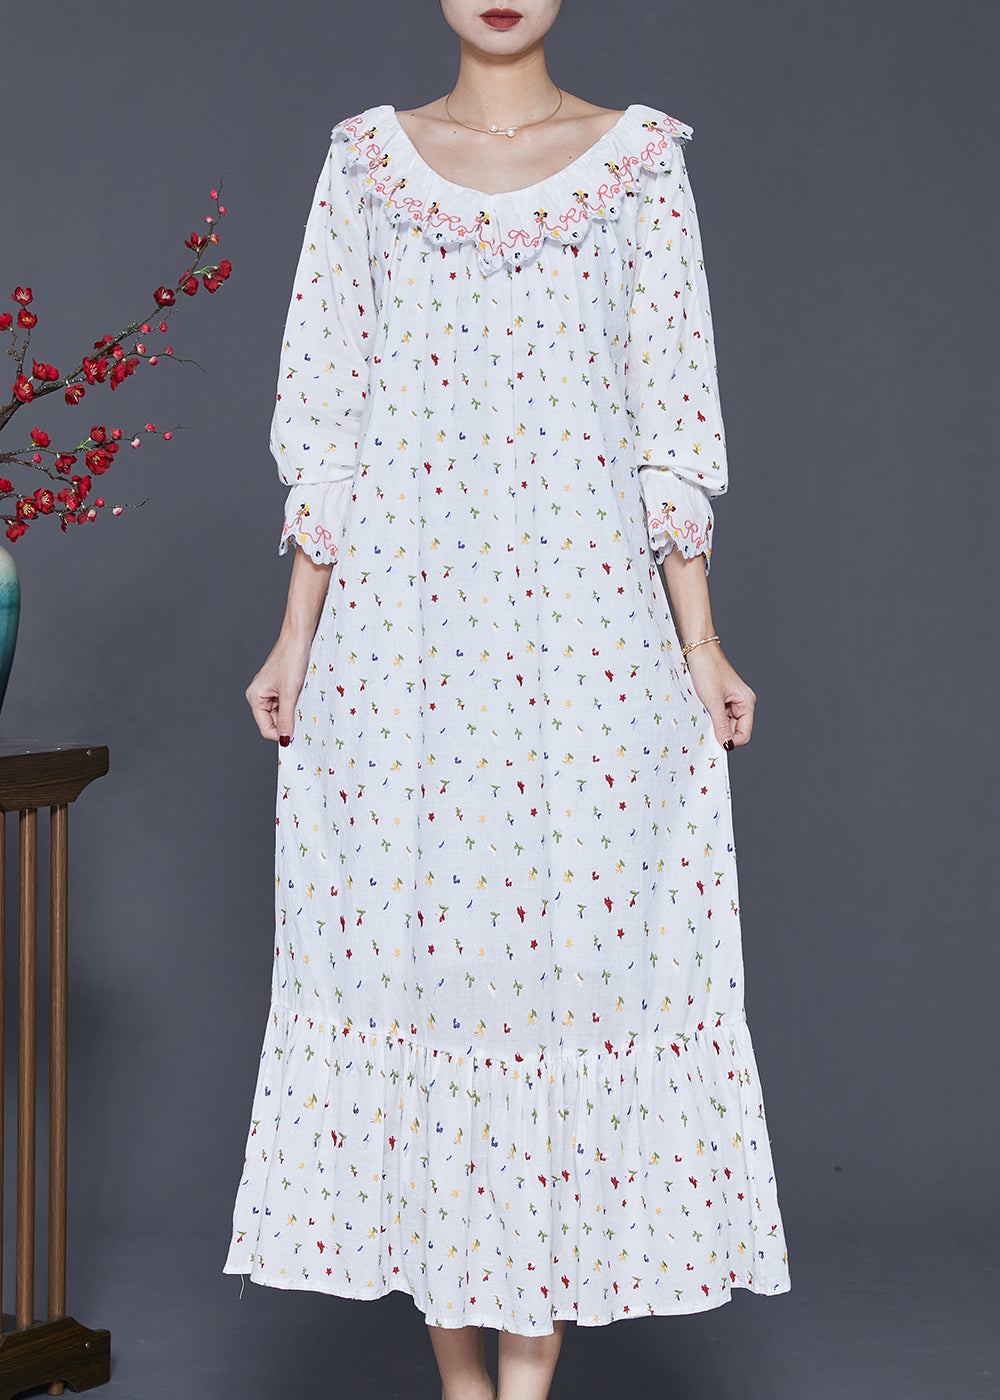 Art White Embroidered Cotton Vacation Dresses Spring